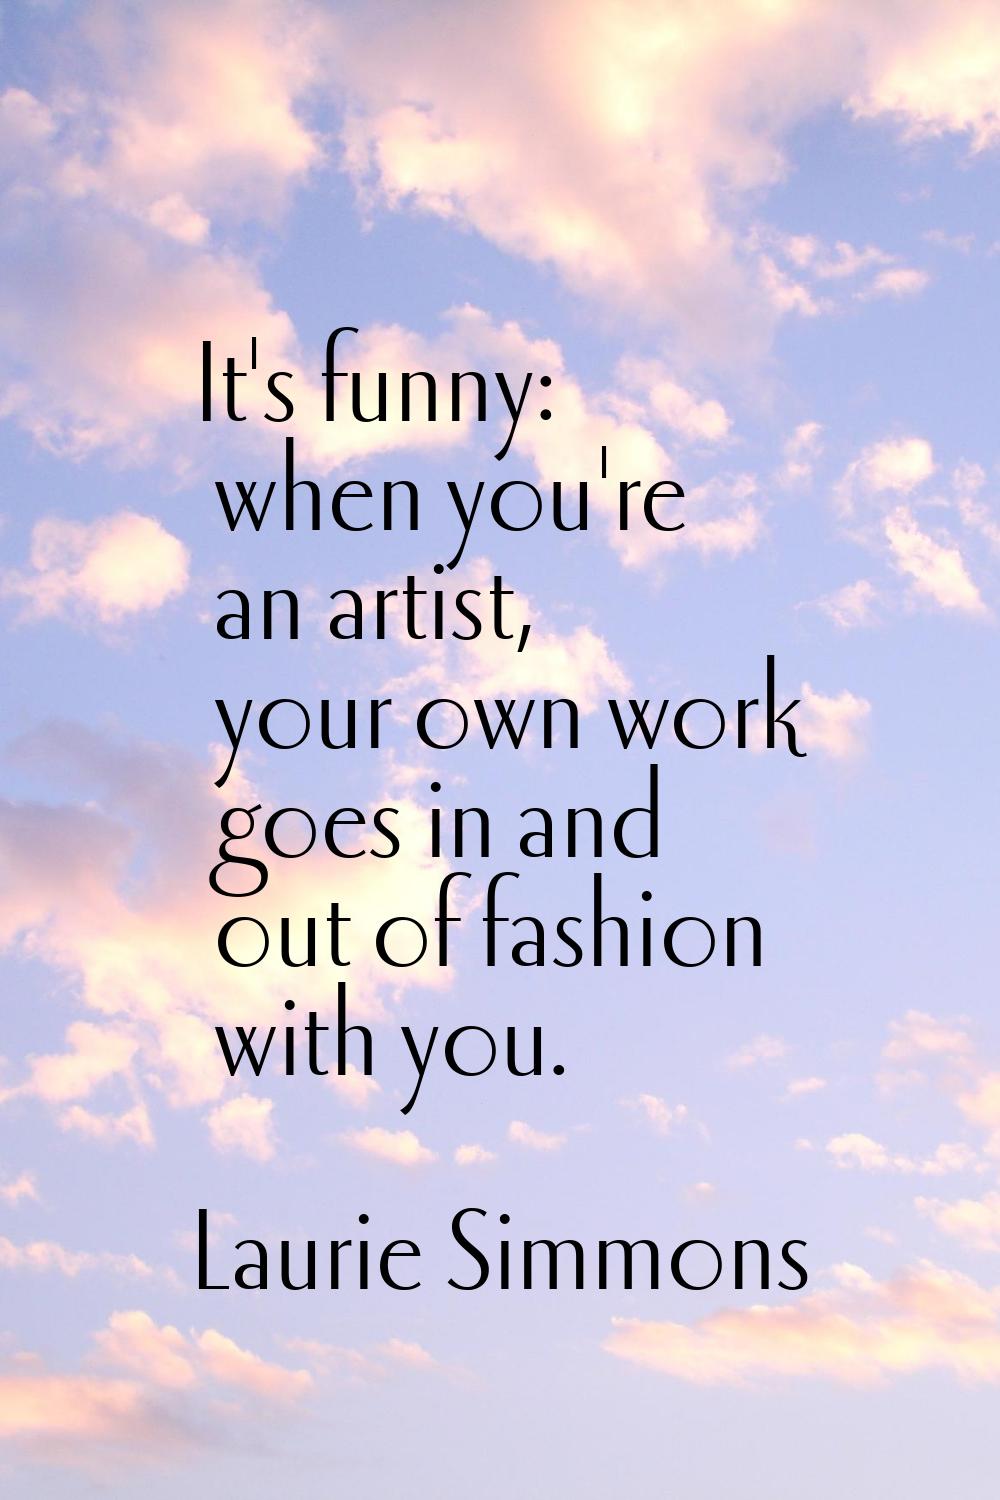 It's funny: when you're an artist, your own work goes in and out of fashion with you.